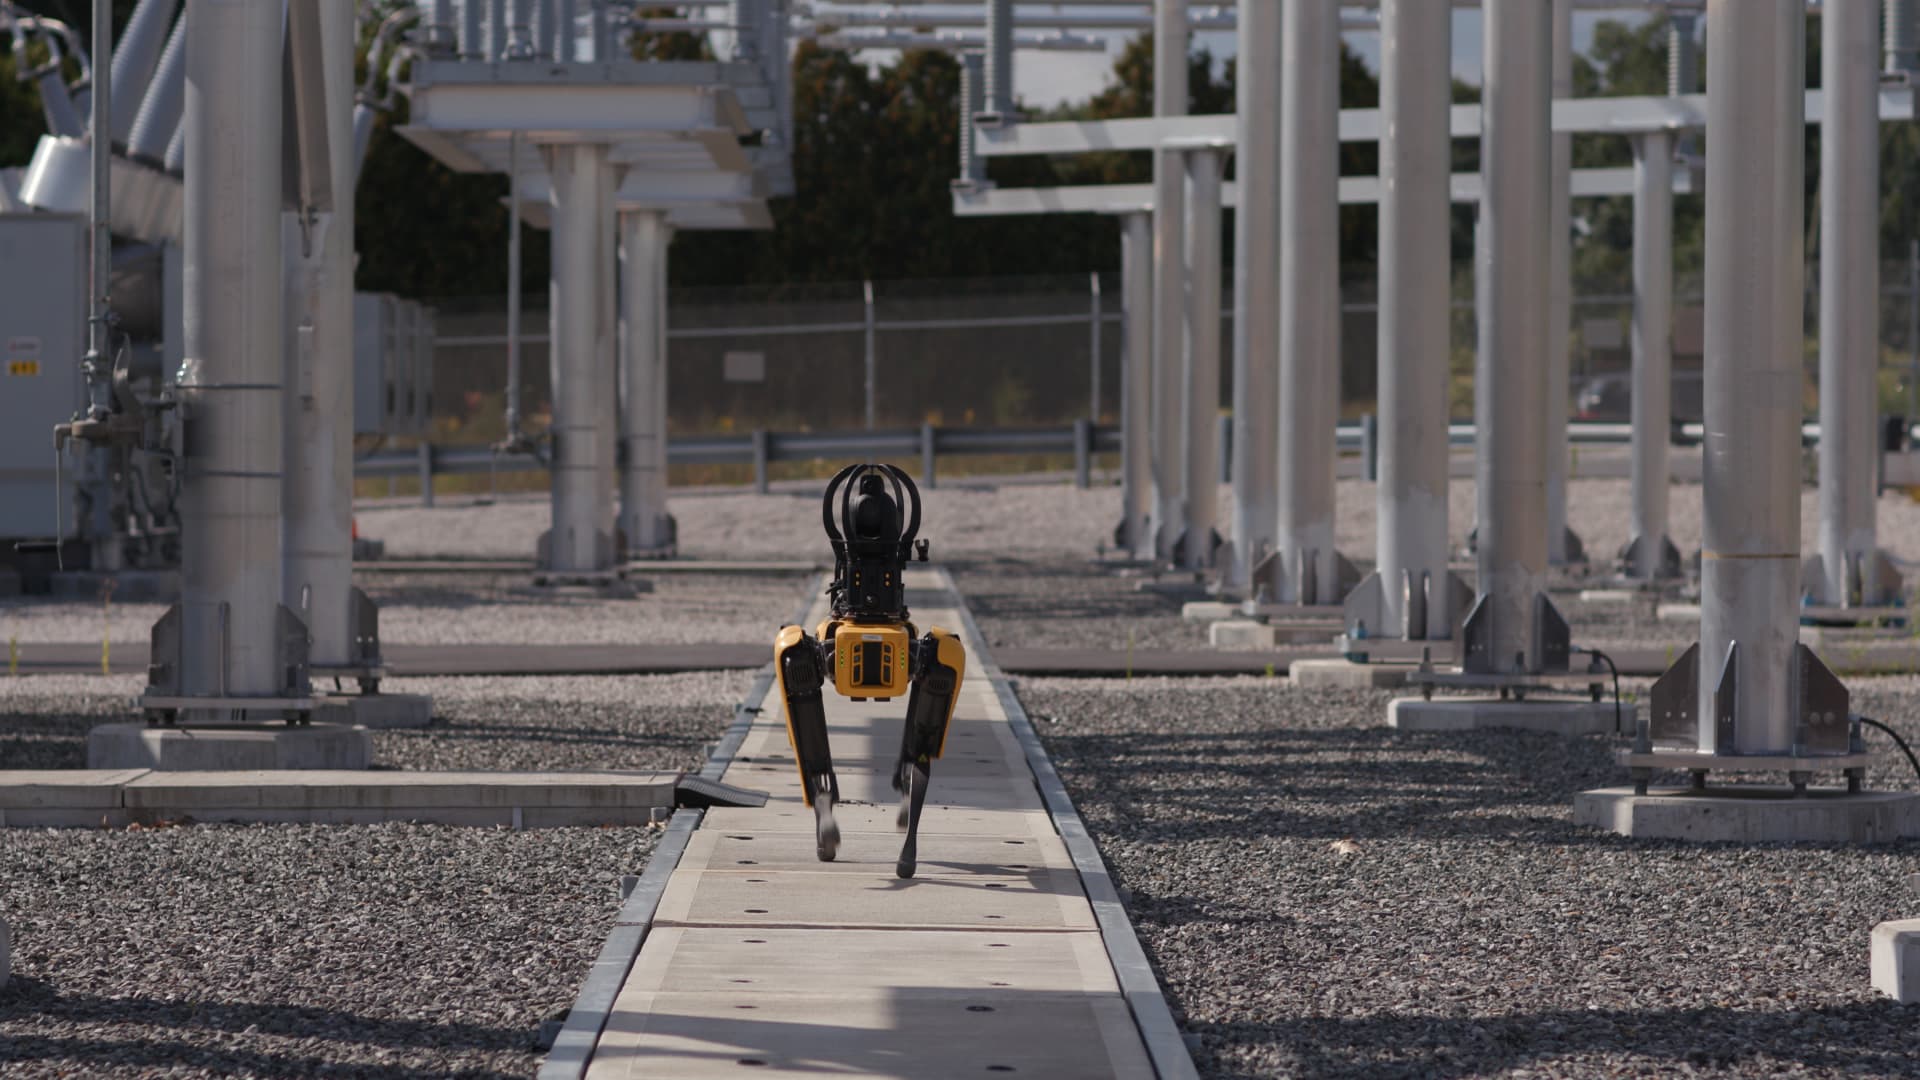 Electric and gas utility company, National Grid, uses a quadruped robot made by Boston Dynamics to do an inspection at one of its substations in Massachusetts.